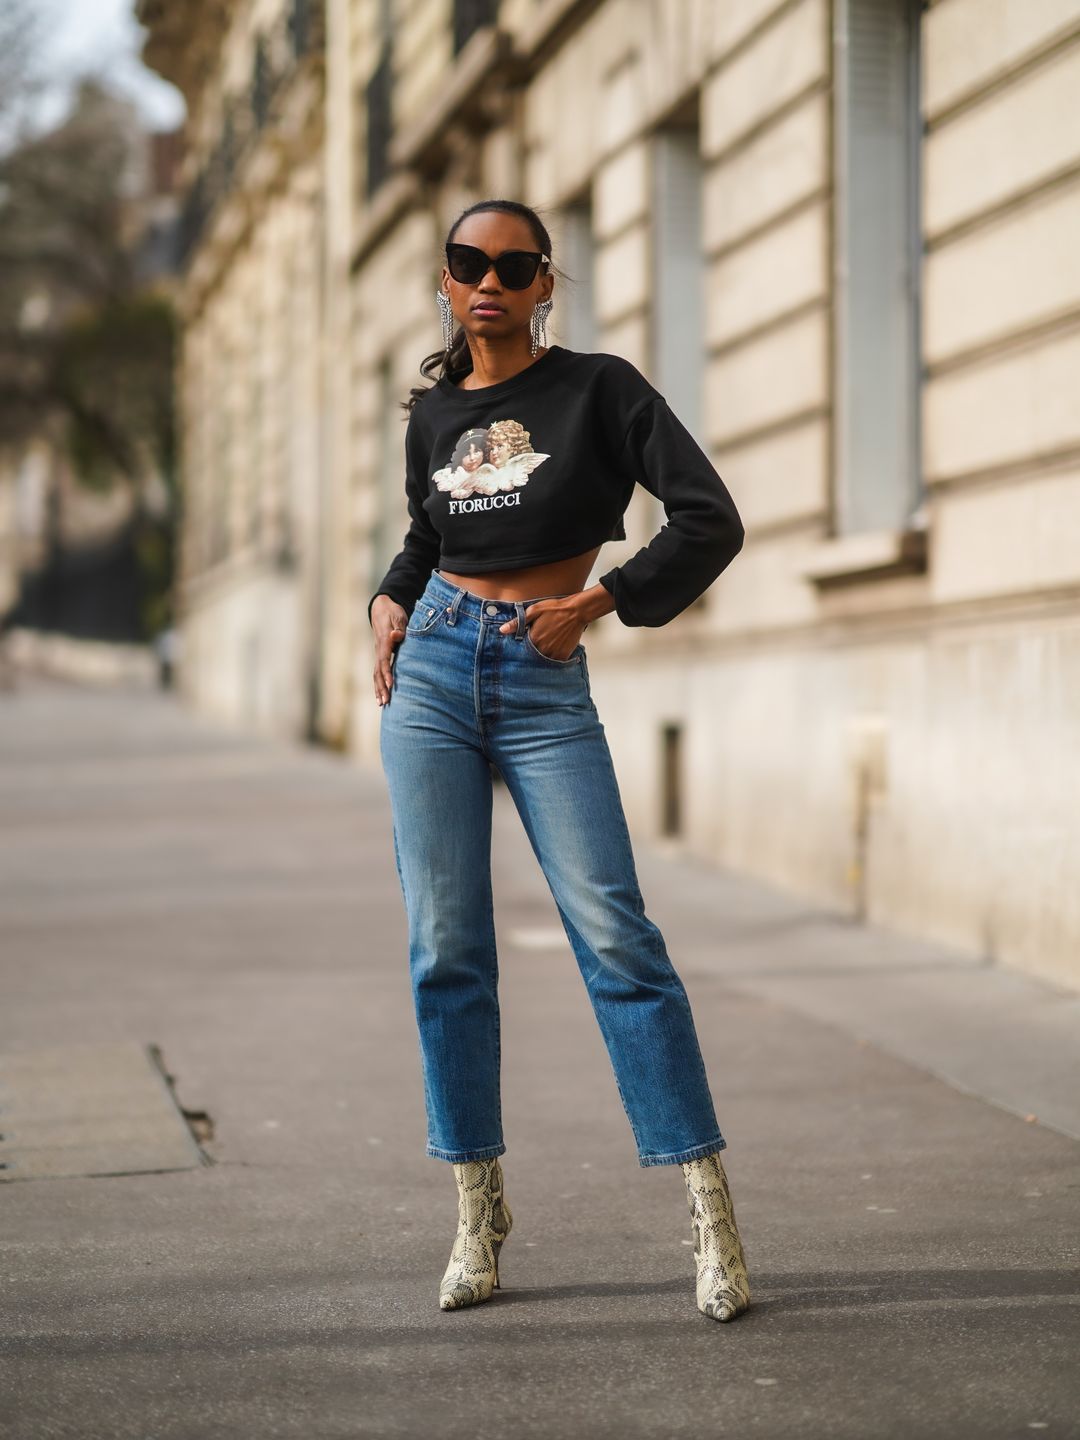 Jeans and a nice top': 10 outfit ideas to inspire you